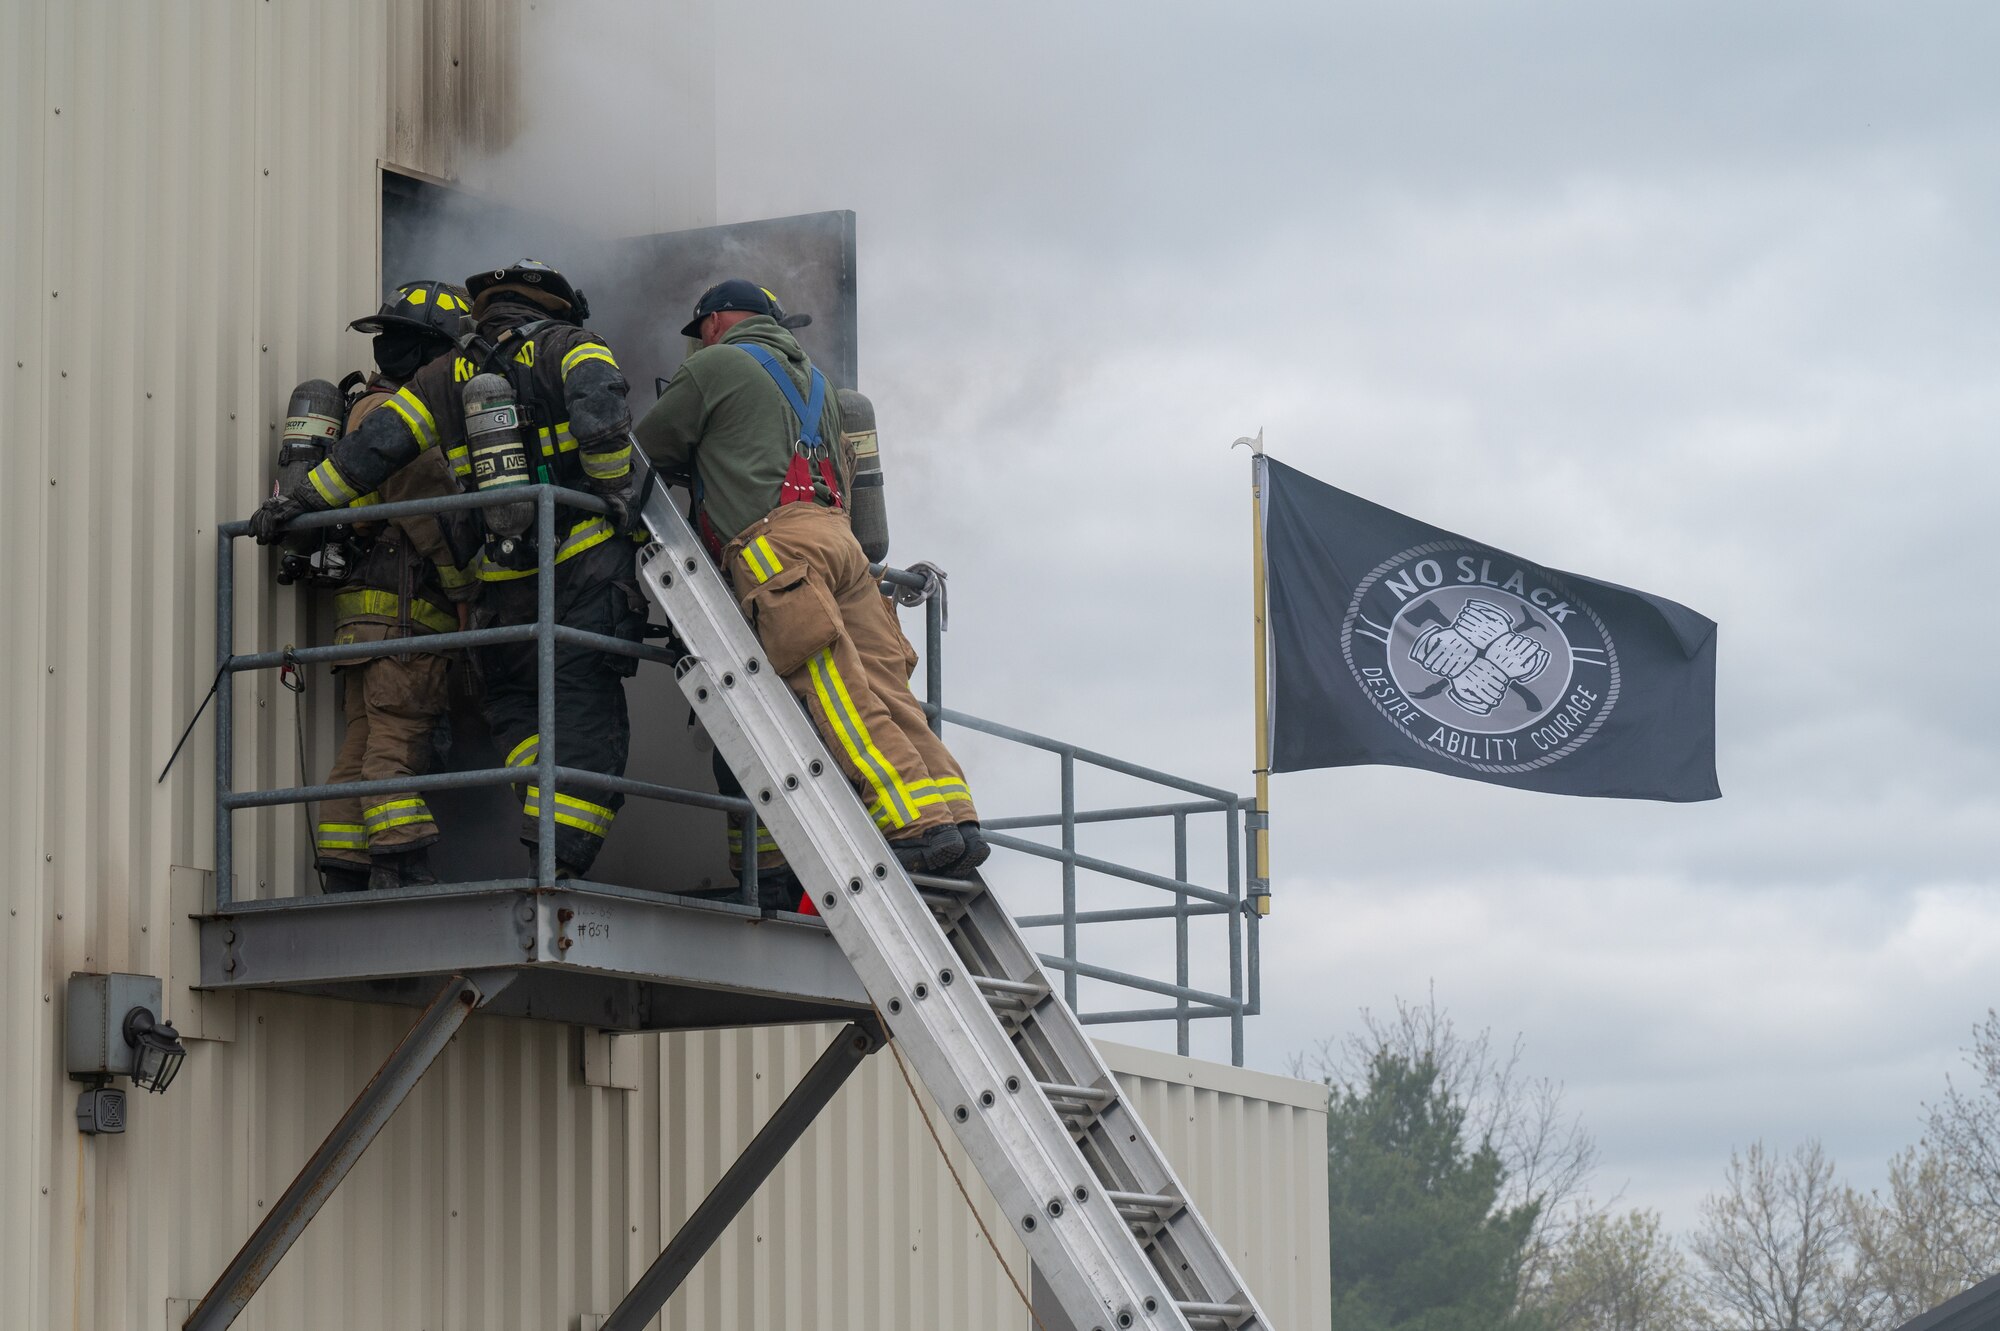 A man atop a leaned ladder talks to a group of firefighters on the platform that he is now level with. In the background, a black flag that reads "NO SLACK".